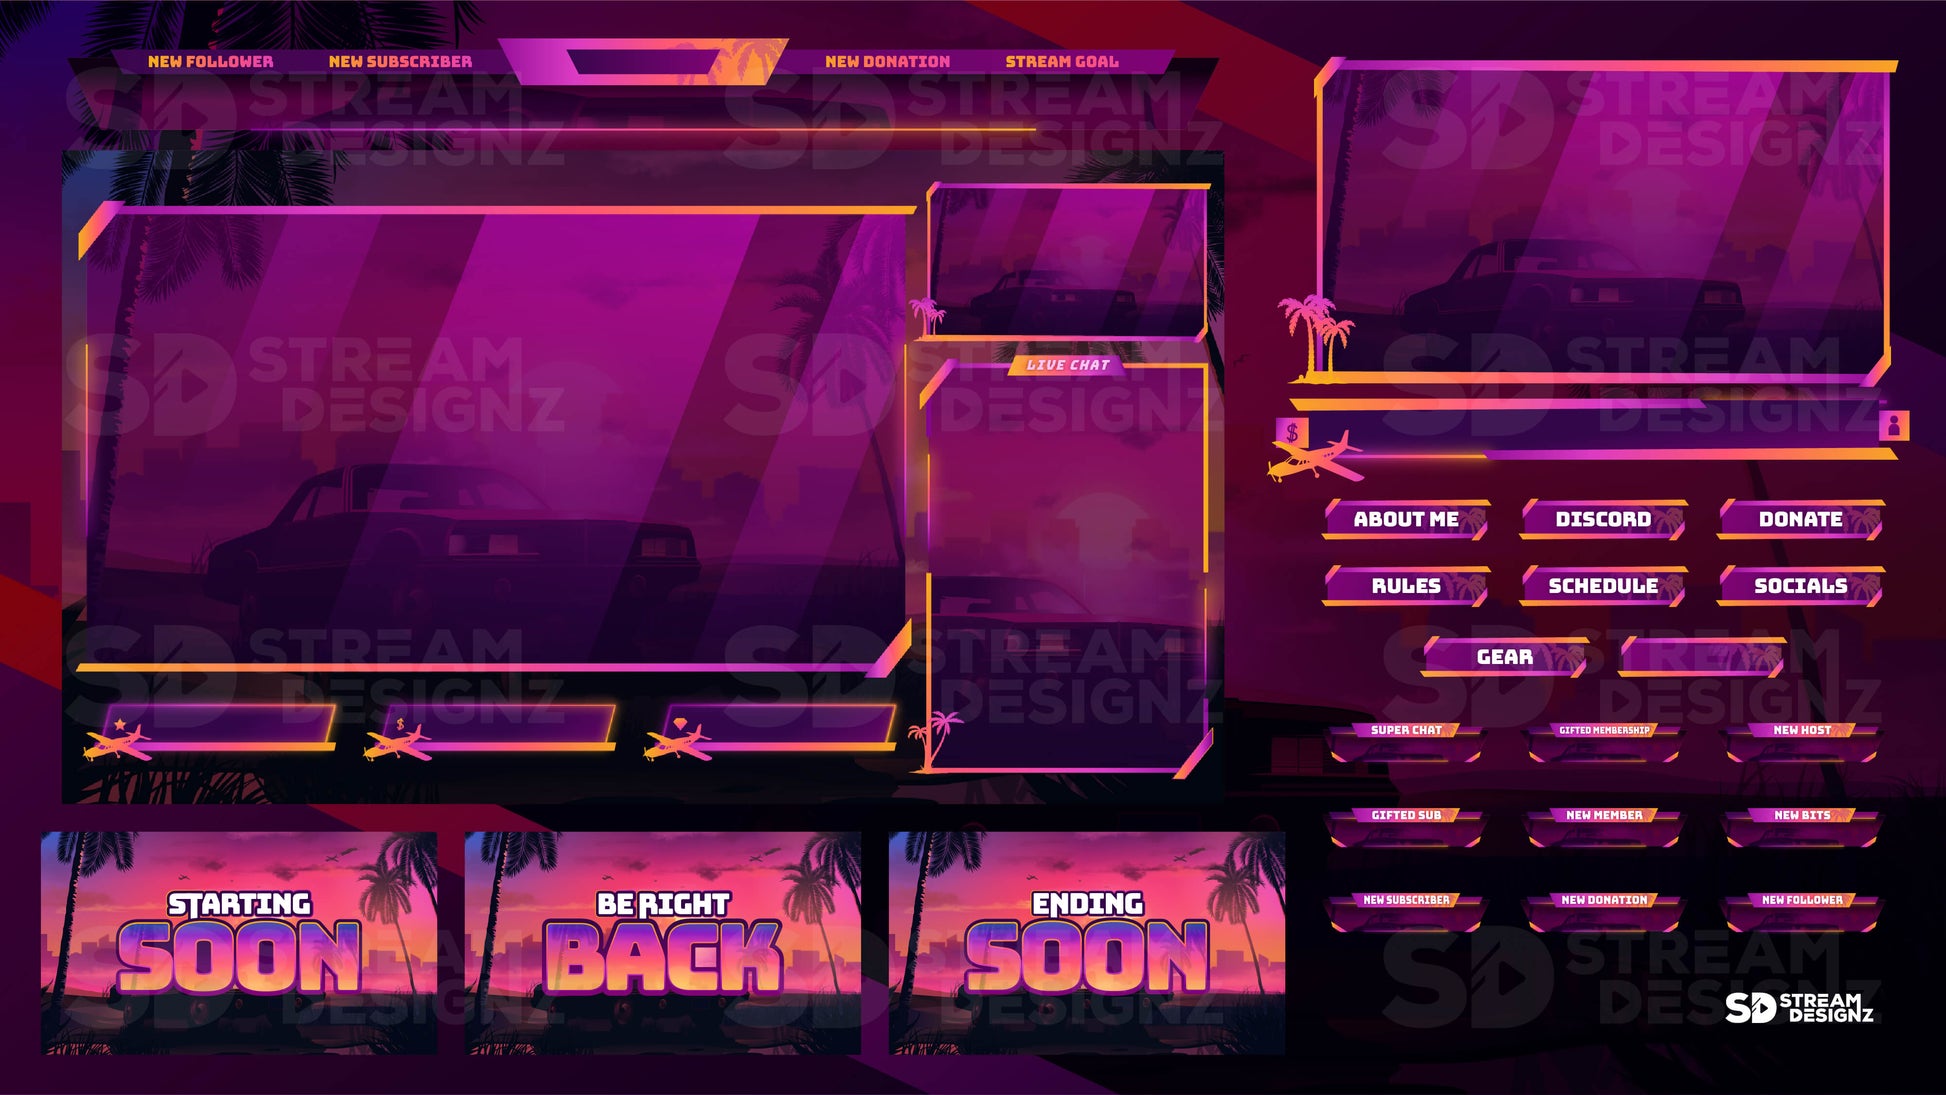 The Ultimate Stream Package - sunset city - Feature Image - Stream Designz